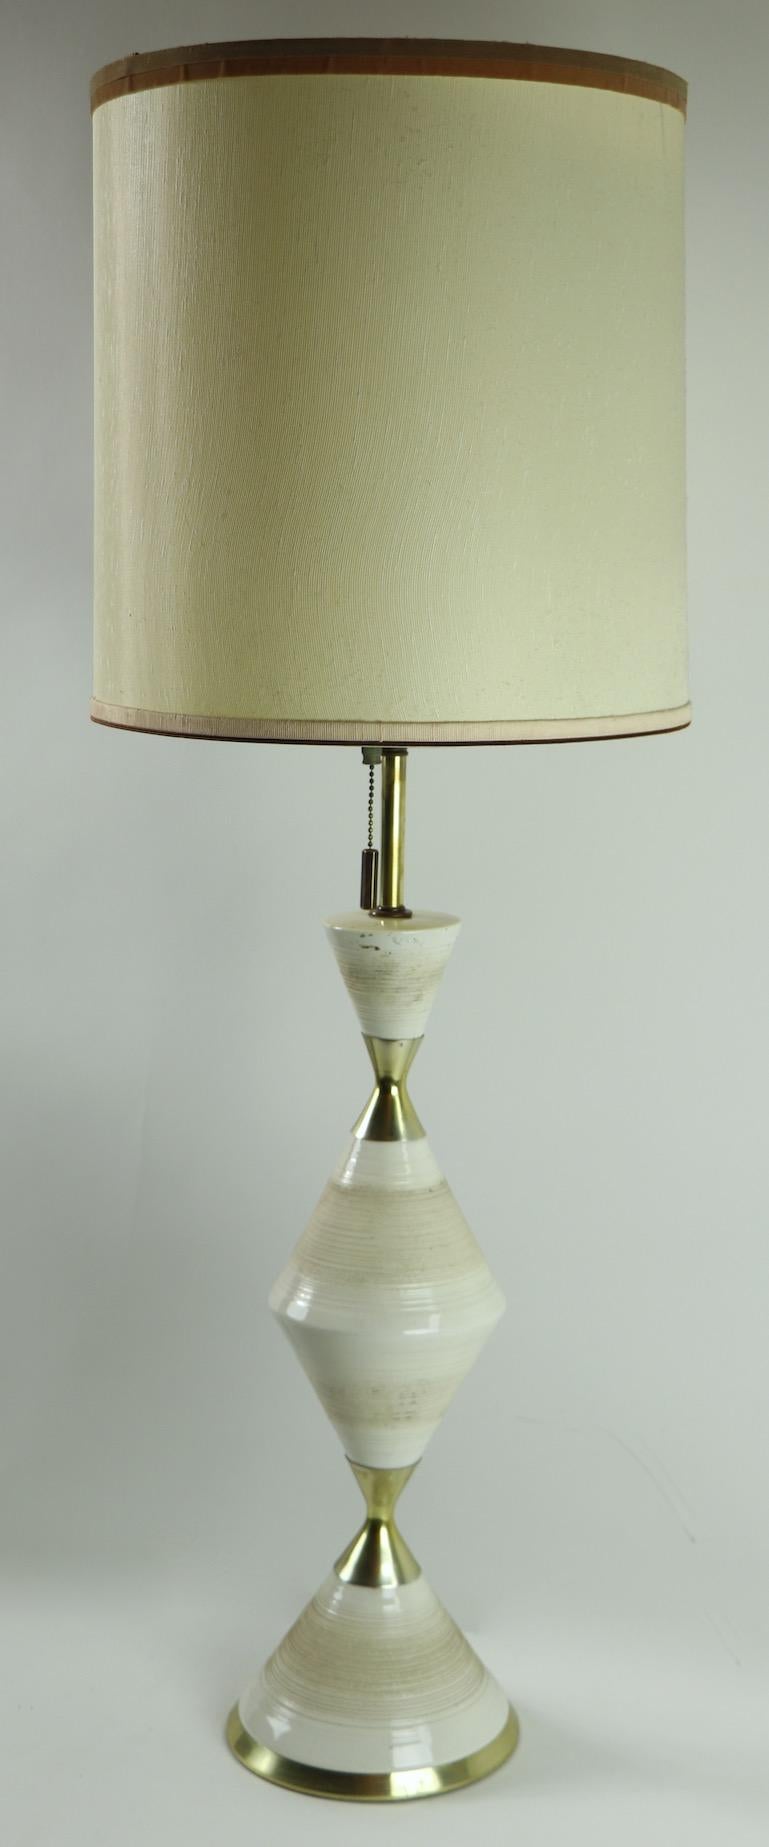 Classic midcentury table lamp, designed by Gerald Thurston. The lamp has a ceramic and brass body of wasted or hourglass, form elements, it is in very fine original, and working condition. The lamp accepts three standard size screw in bulbs, and has